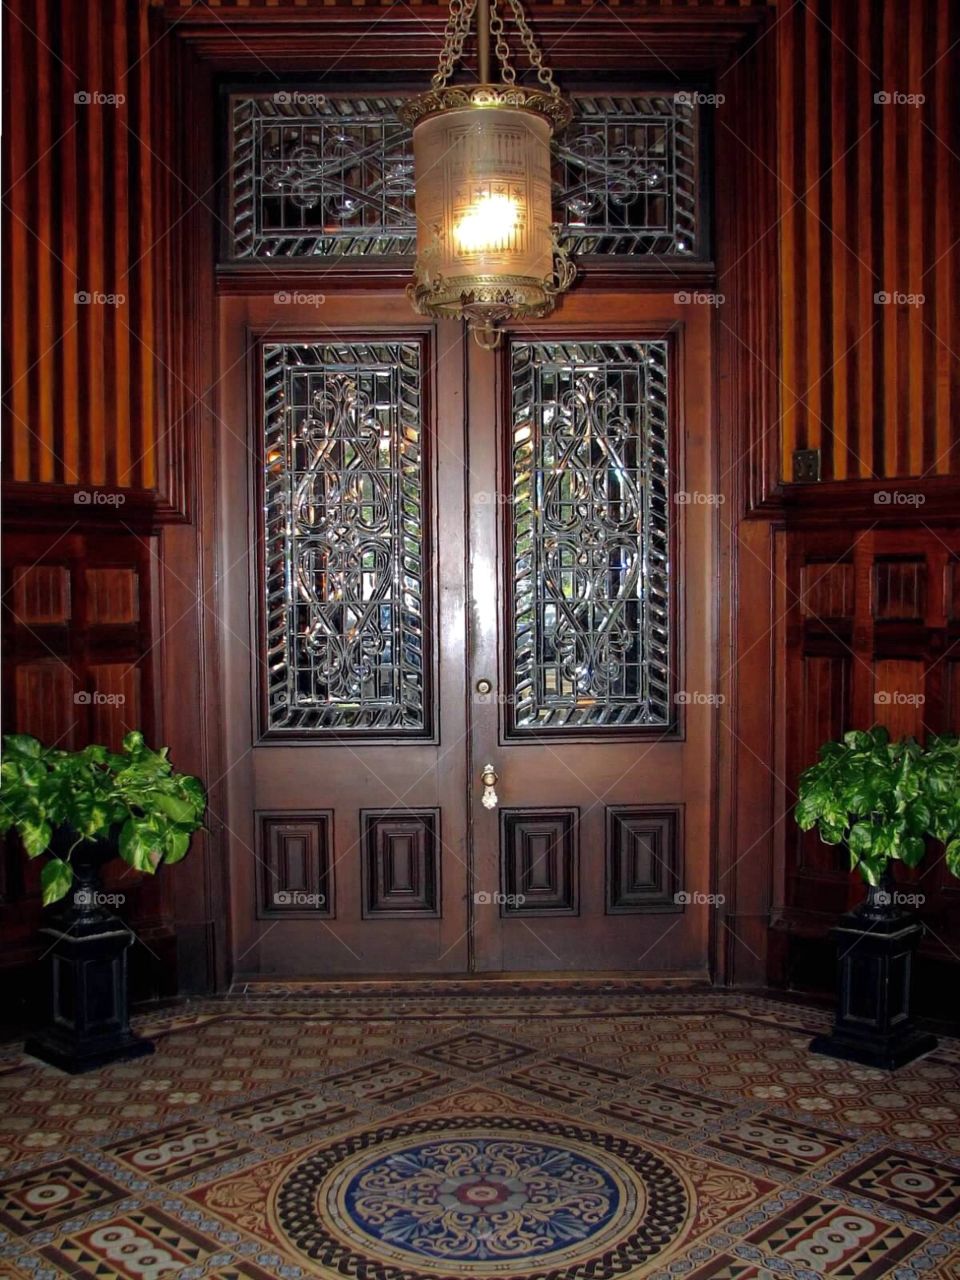 Ornate wooden door with leaded glass